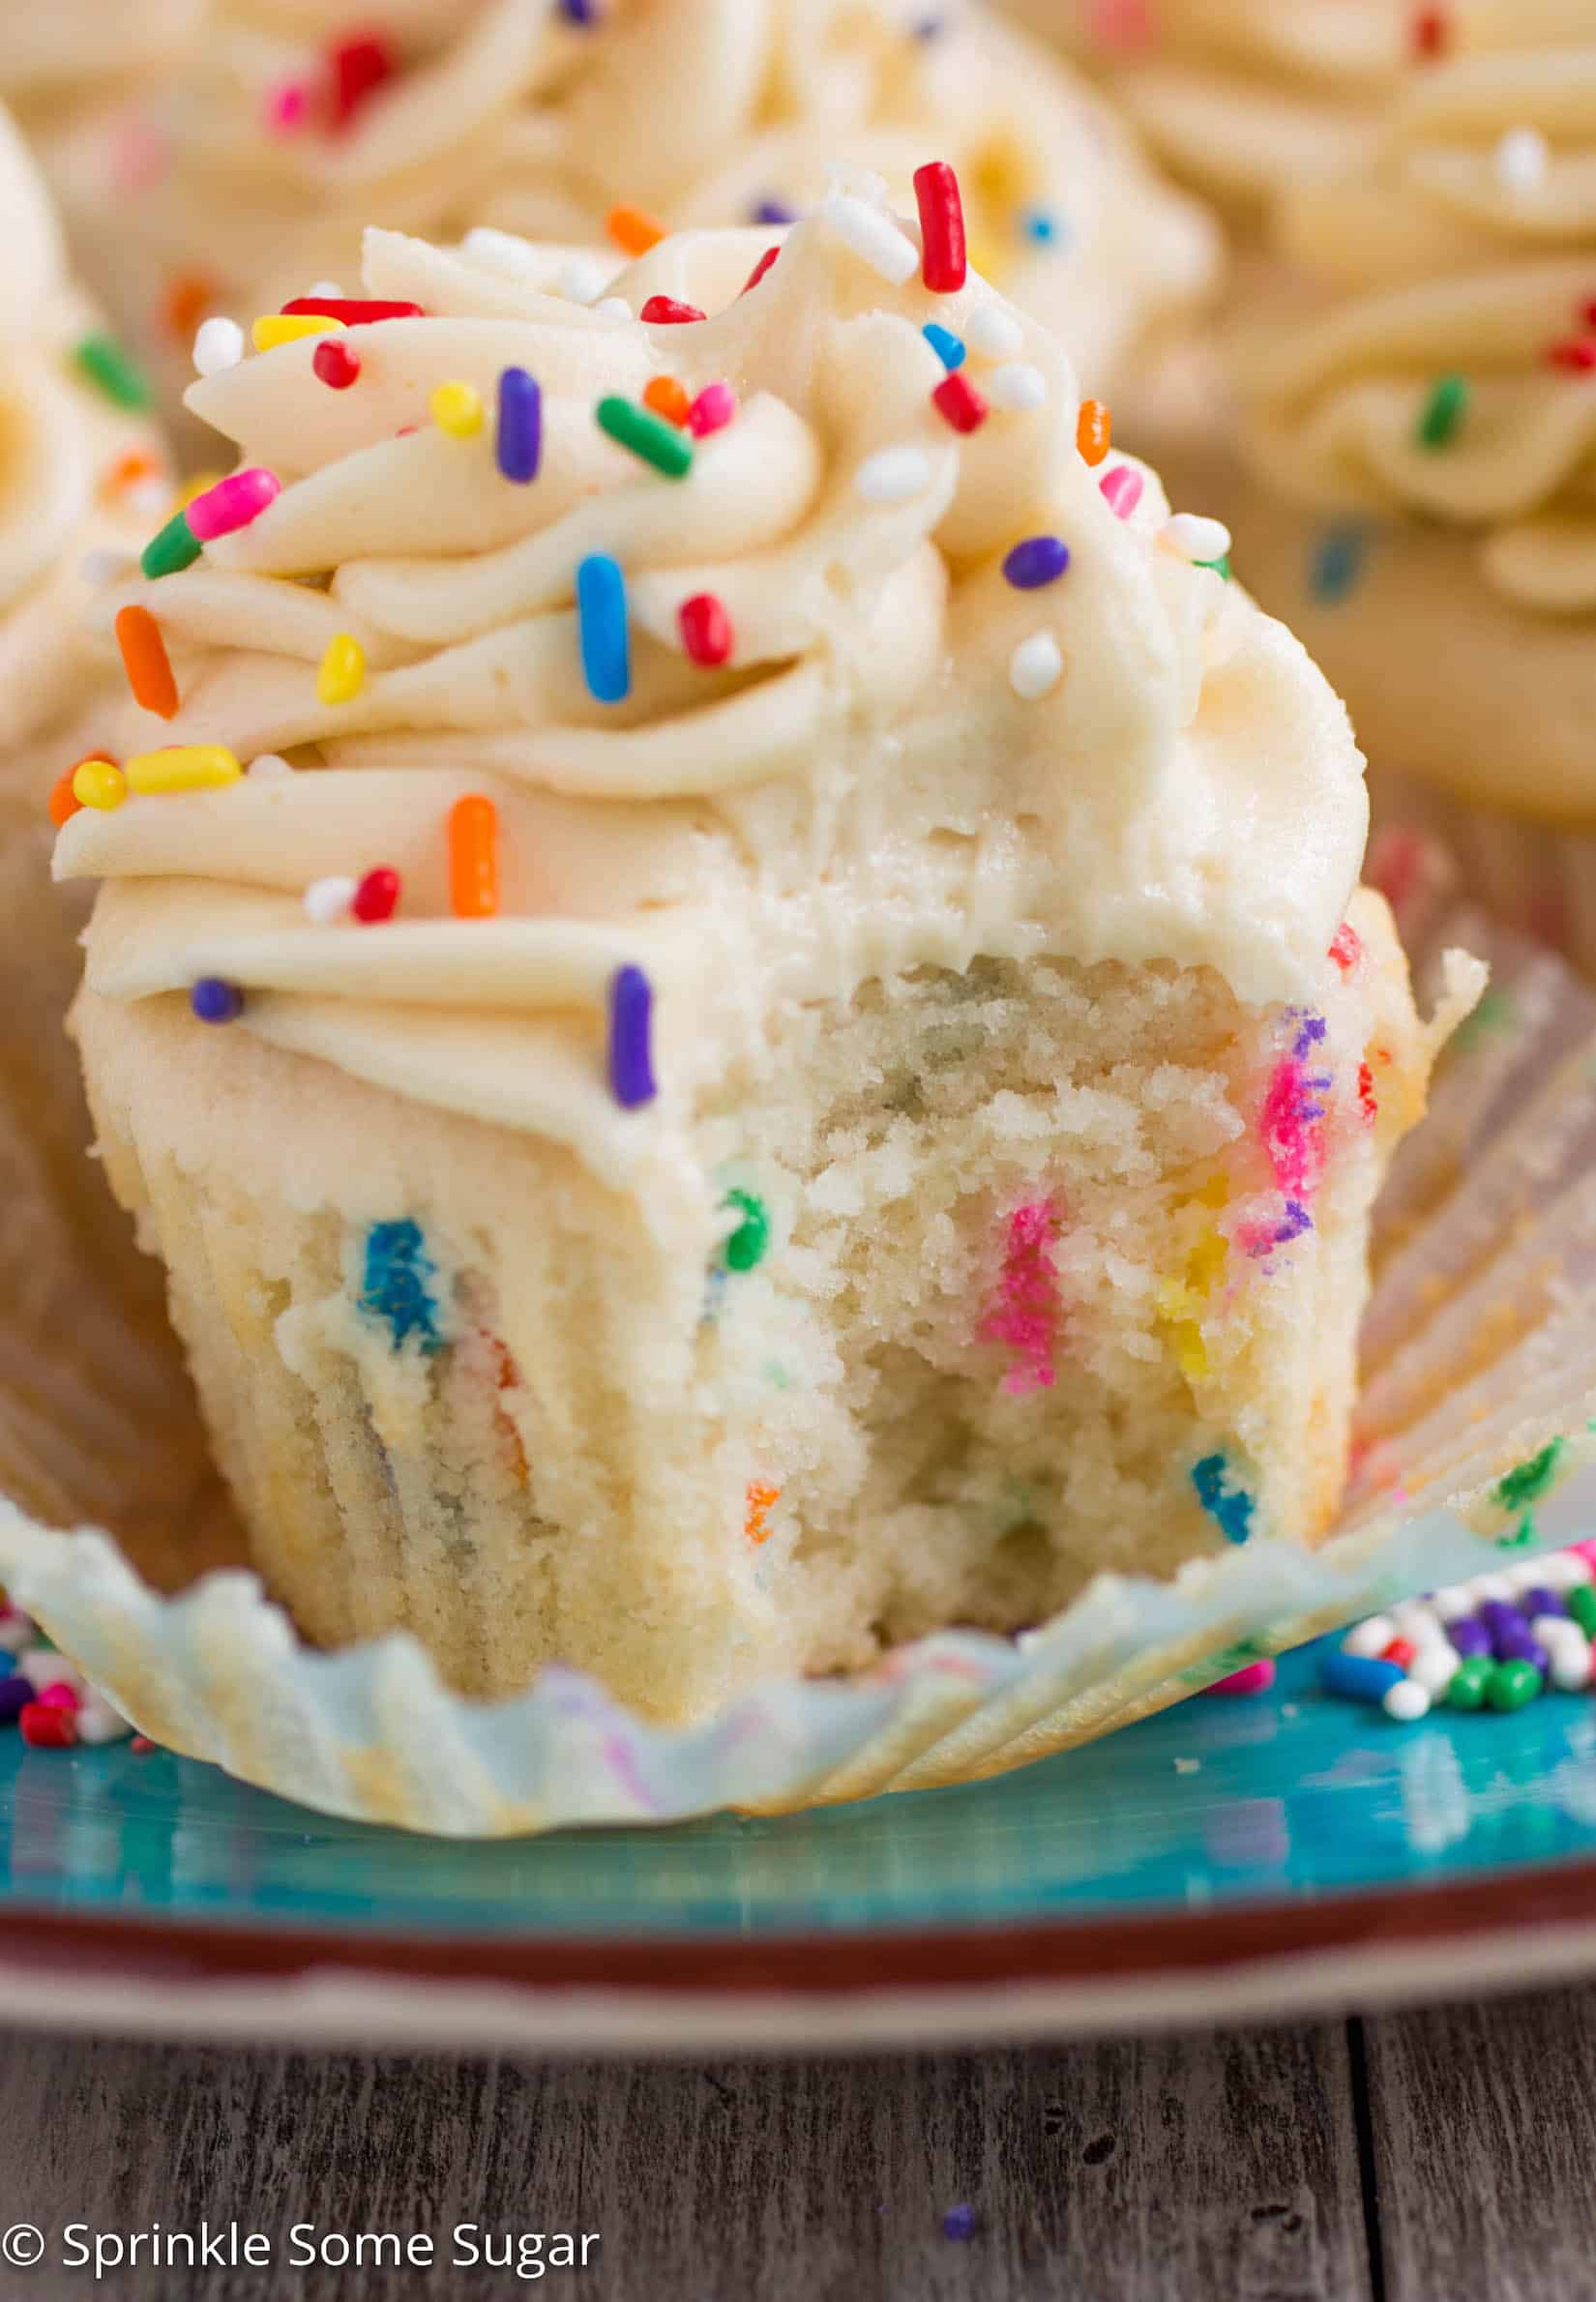  Funfetti Cupcakes with Cake Batter Frosting - My favorite basic fluffy vanilla cupcakes chock full of sprinkles and topped with a creamy cake batter frosting!